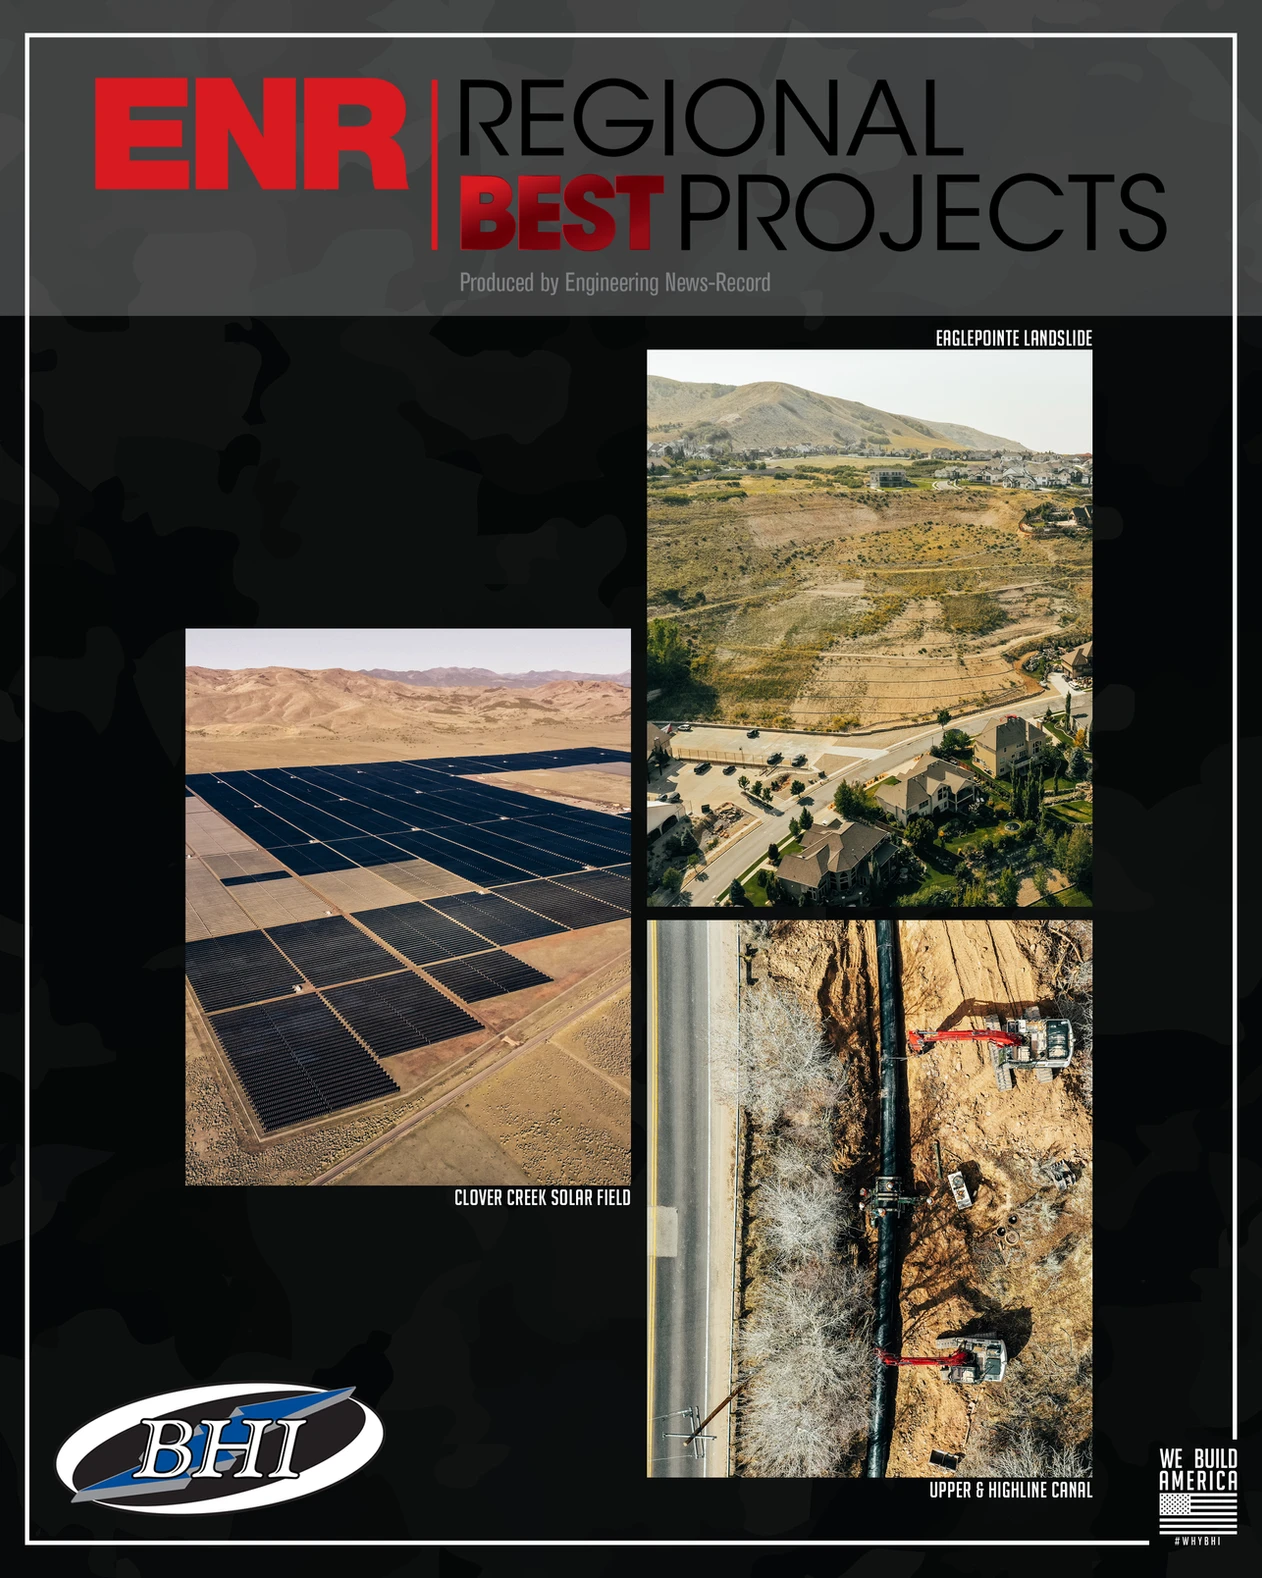 THREE BHI PROJECTS RECOGNIZED BY ENR IN THE 2022 INTERMOUNTAIN BEST PROJECTS COMPETITION